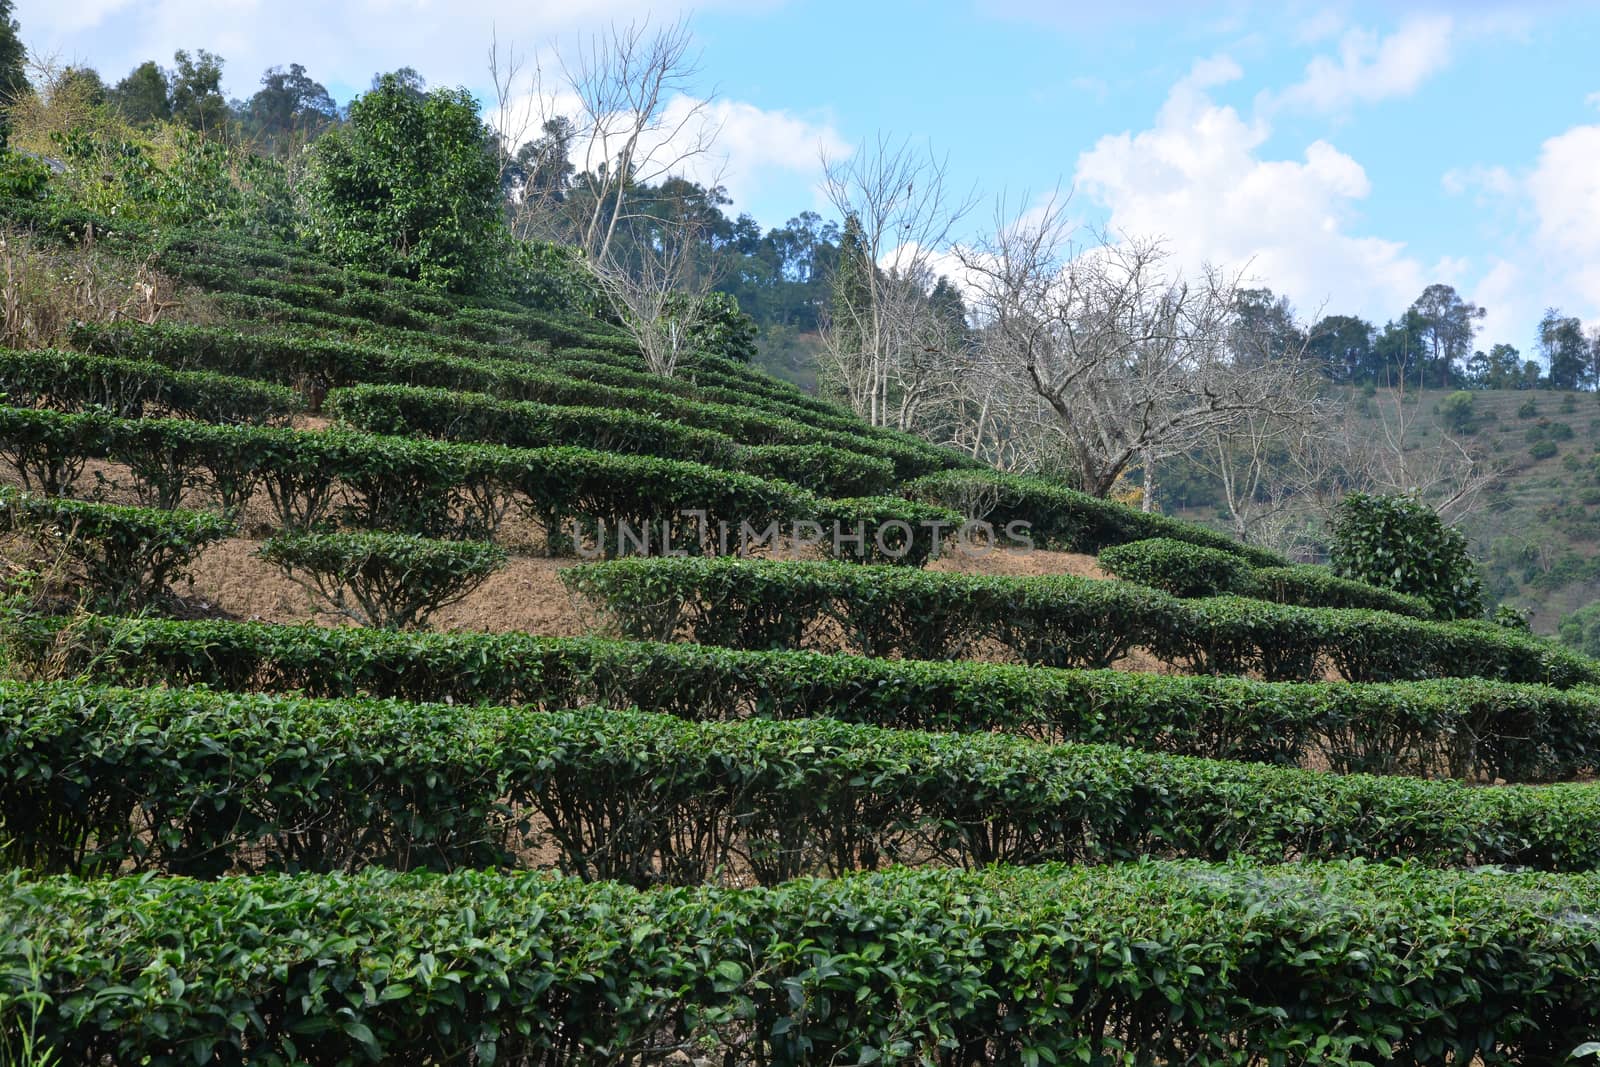 Tea plantation on hill by ideation90